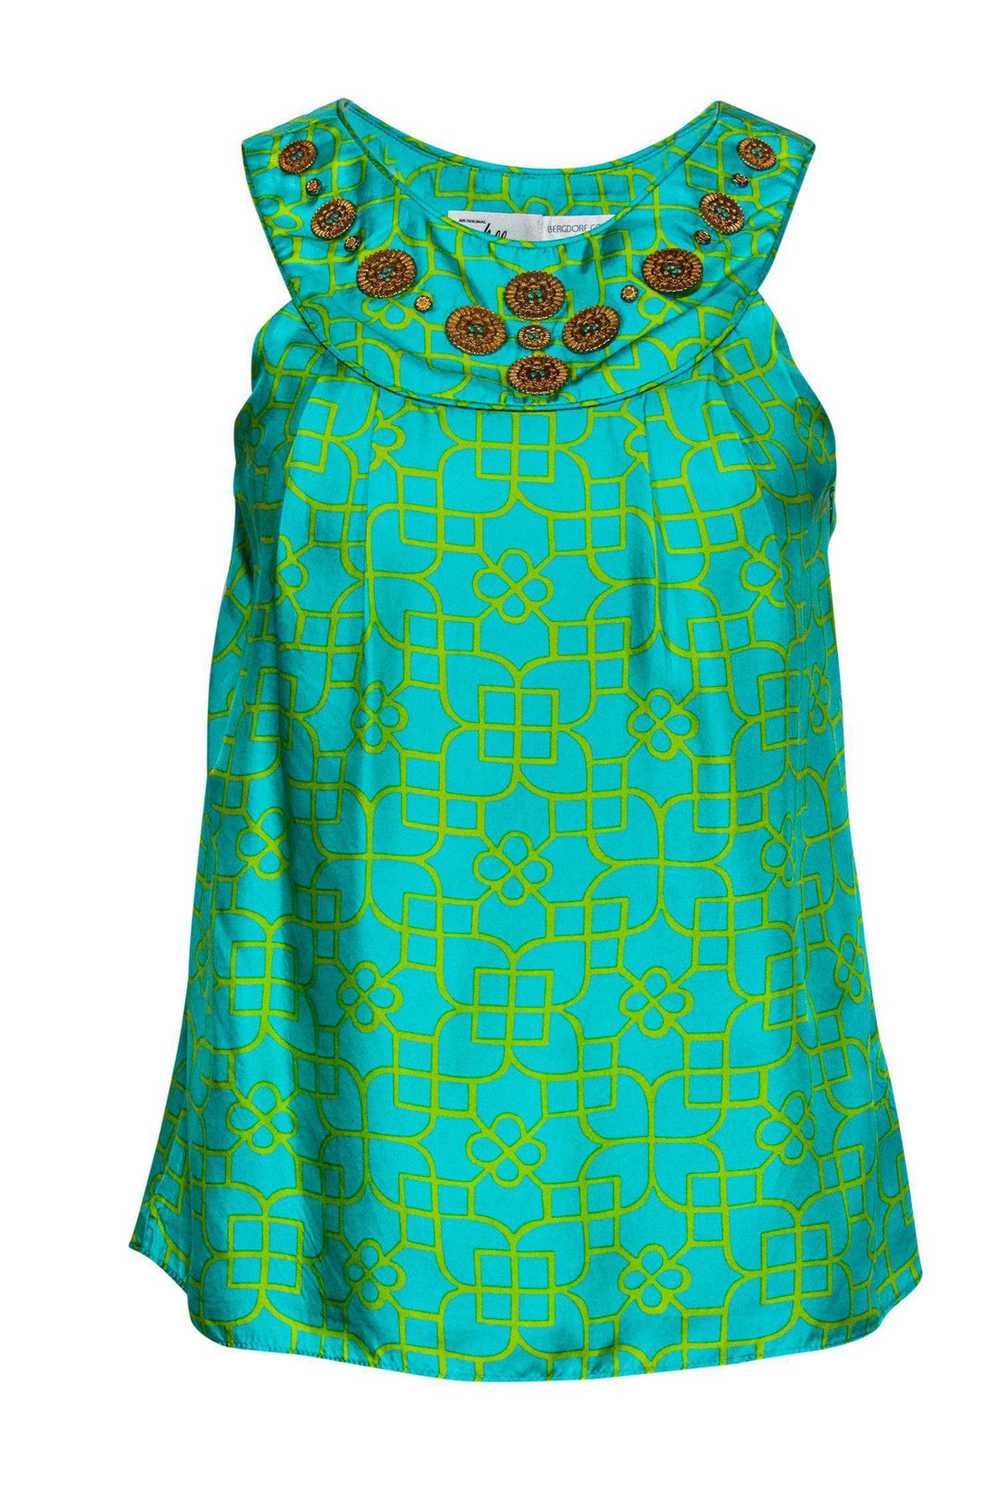 Milly - Bright Green & Blue Printed Embellished T… - image 1